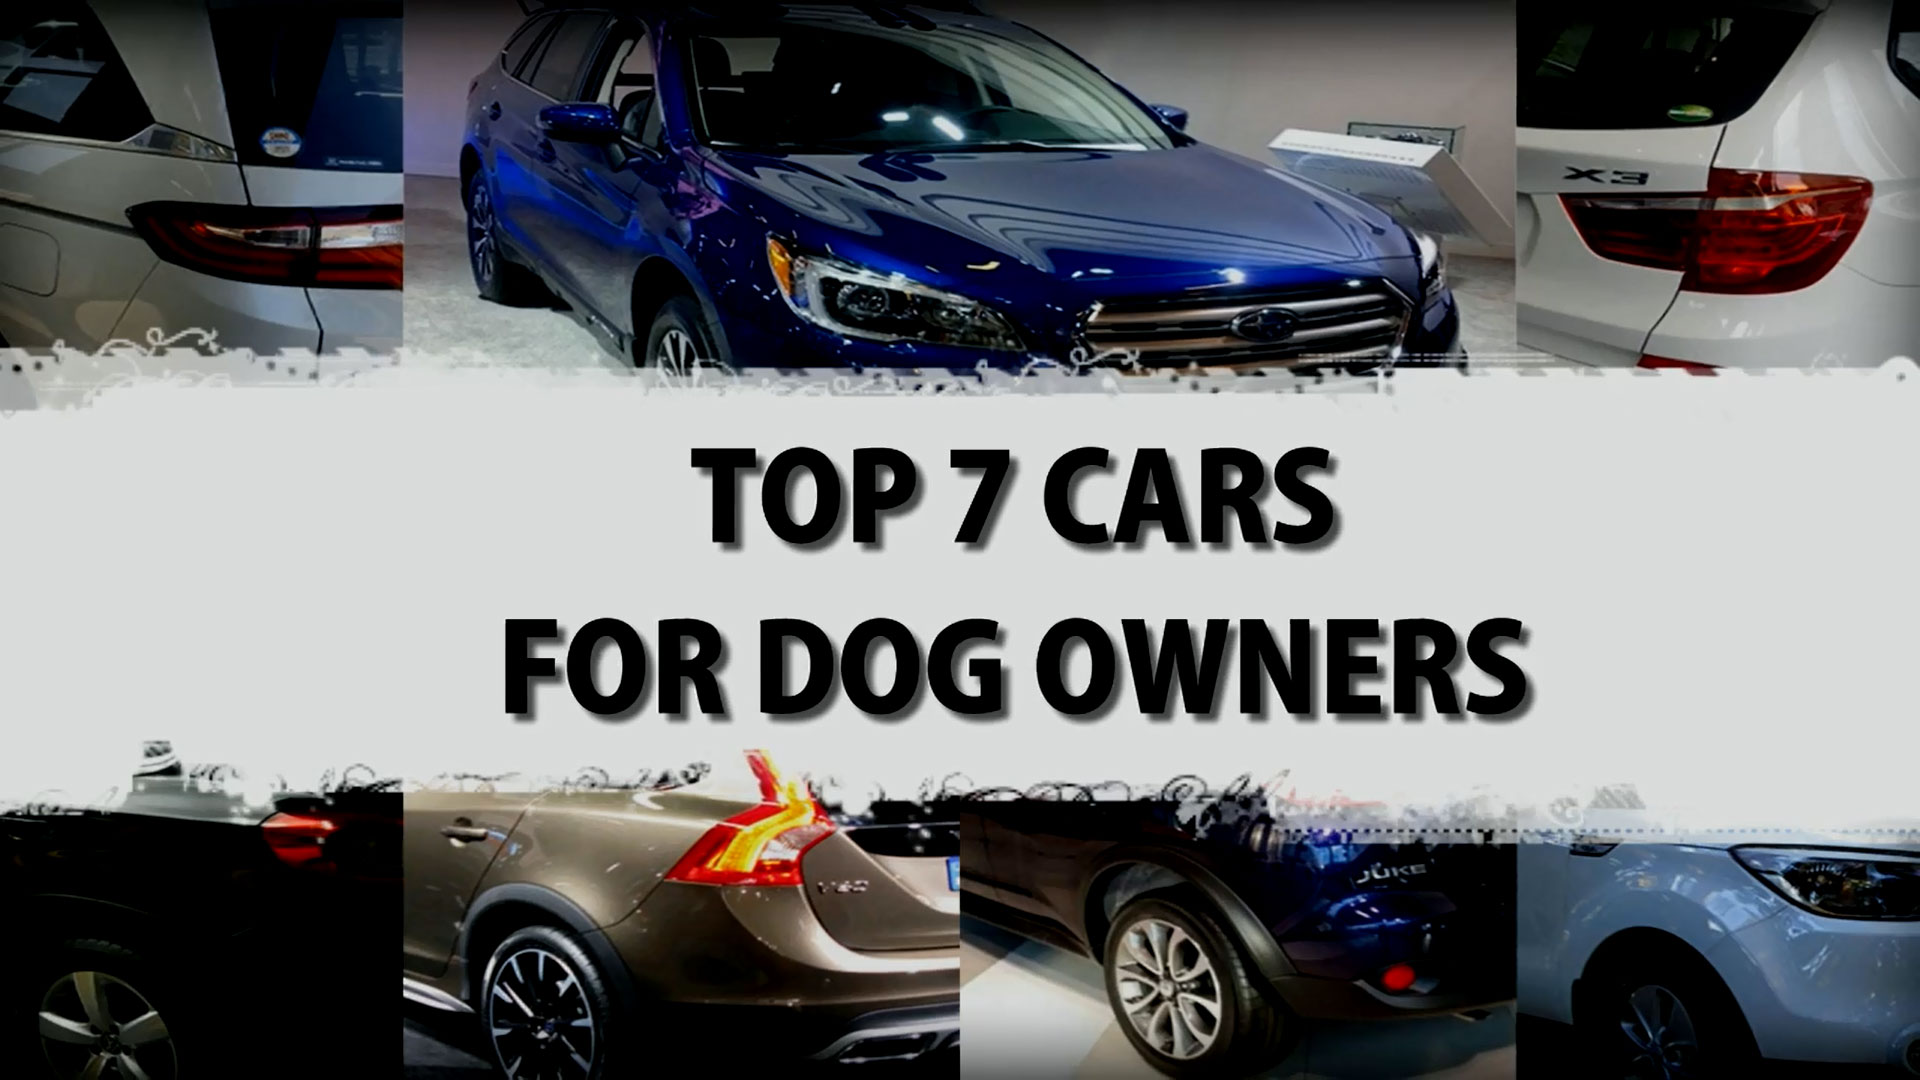 Top 7 Cars For Dog Owners To Consider When Buying A Car